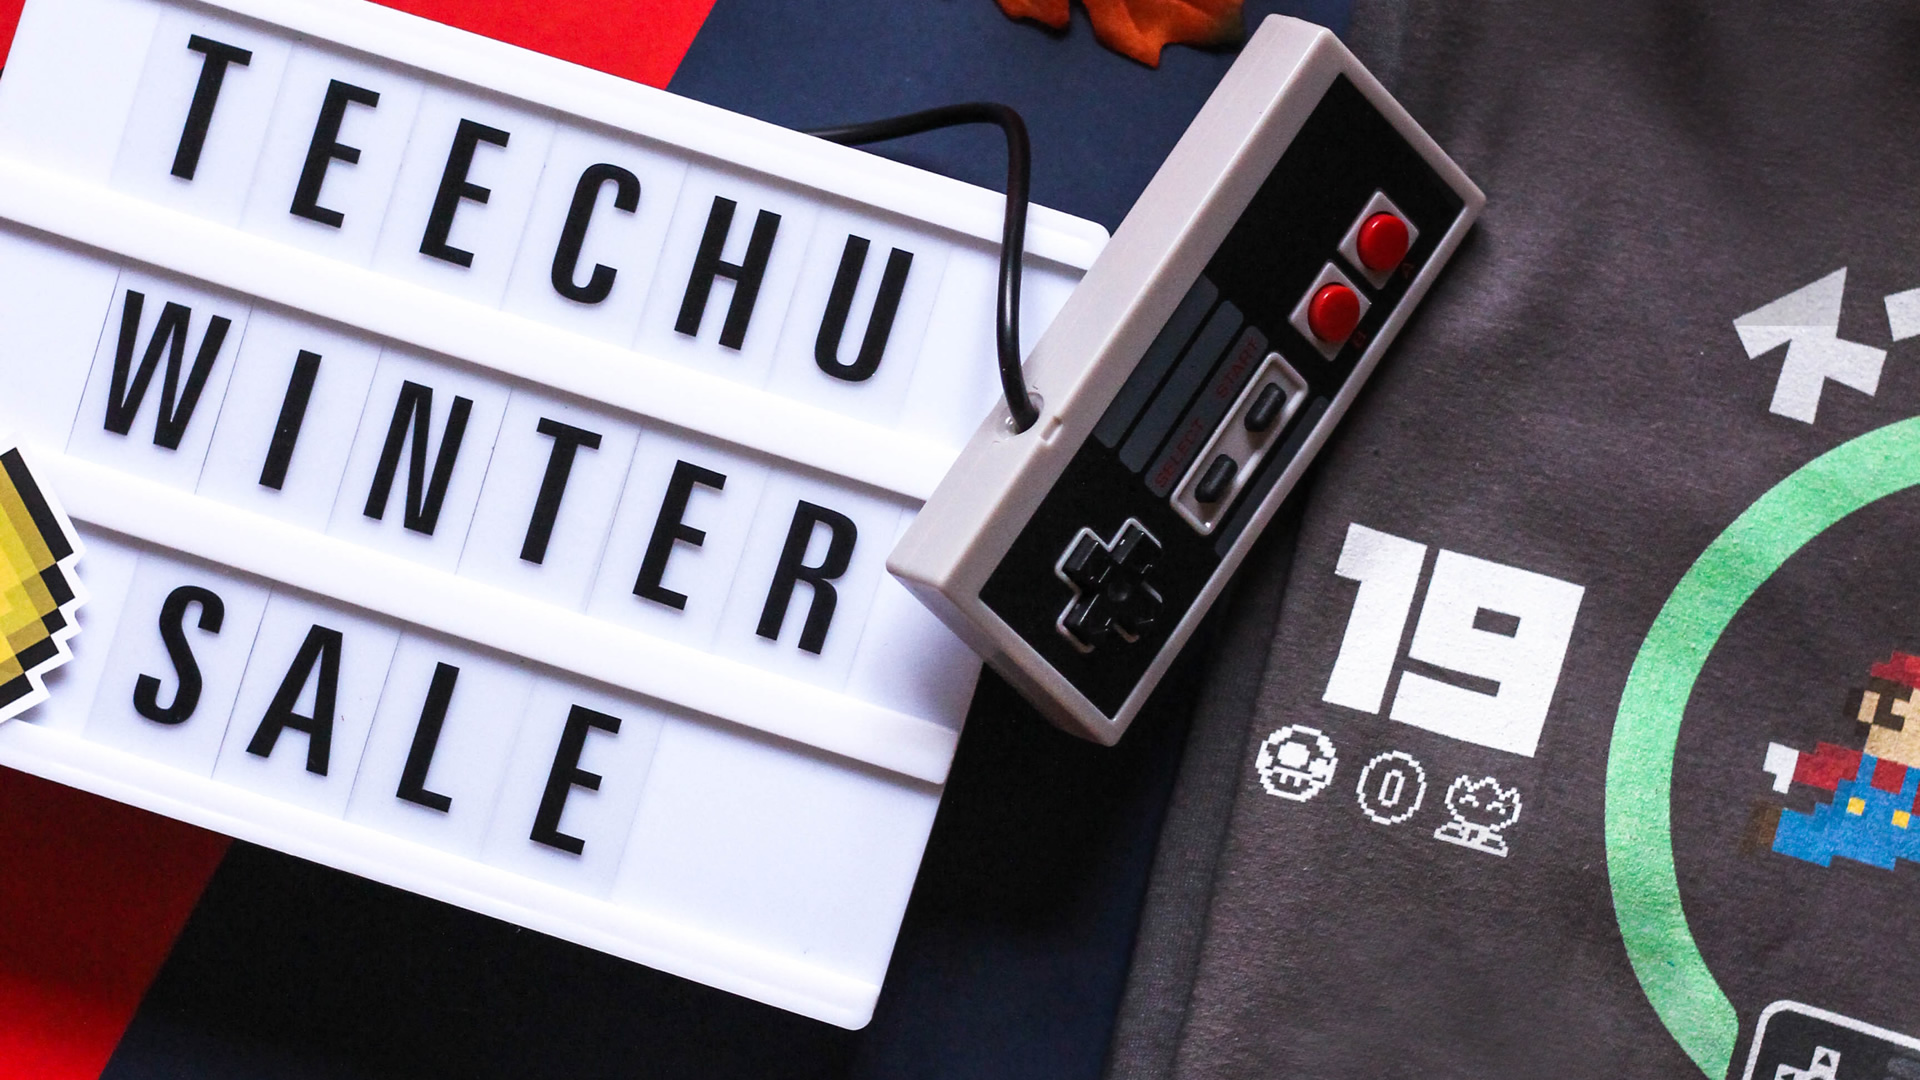 Must Have Geeky Tees in our Winter Sale